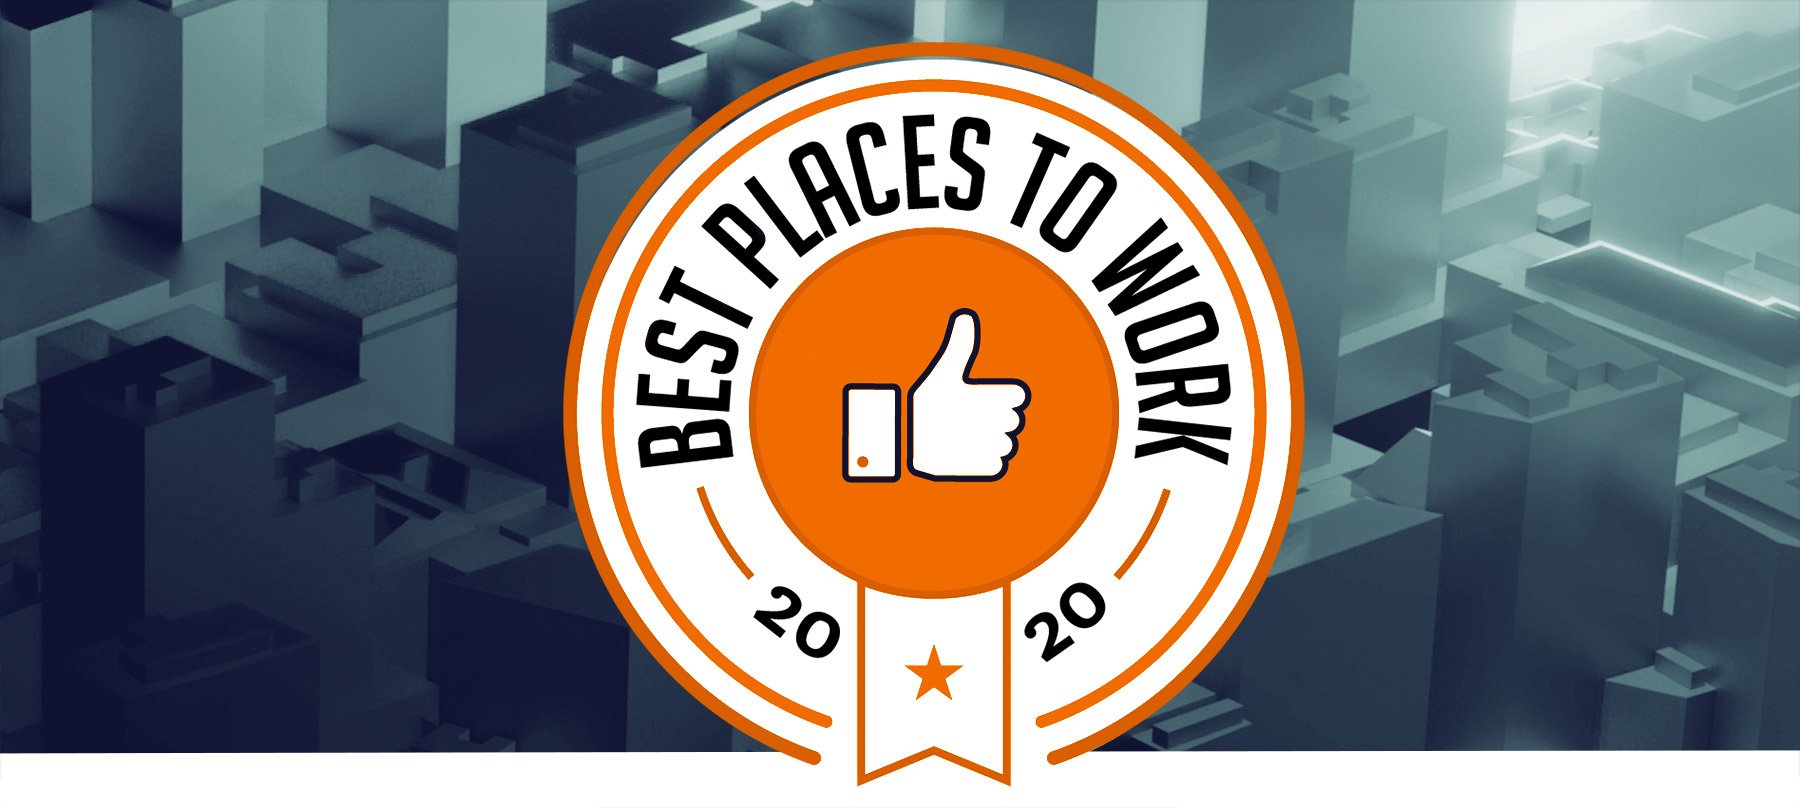 Best Places to Work 2020